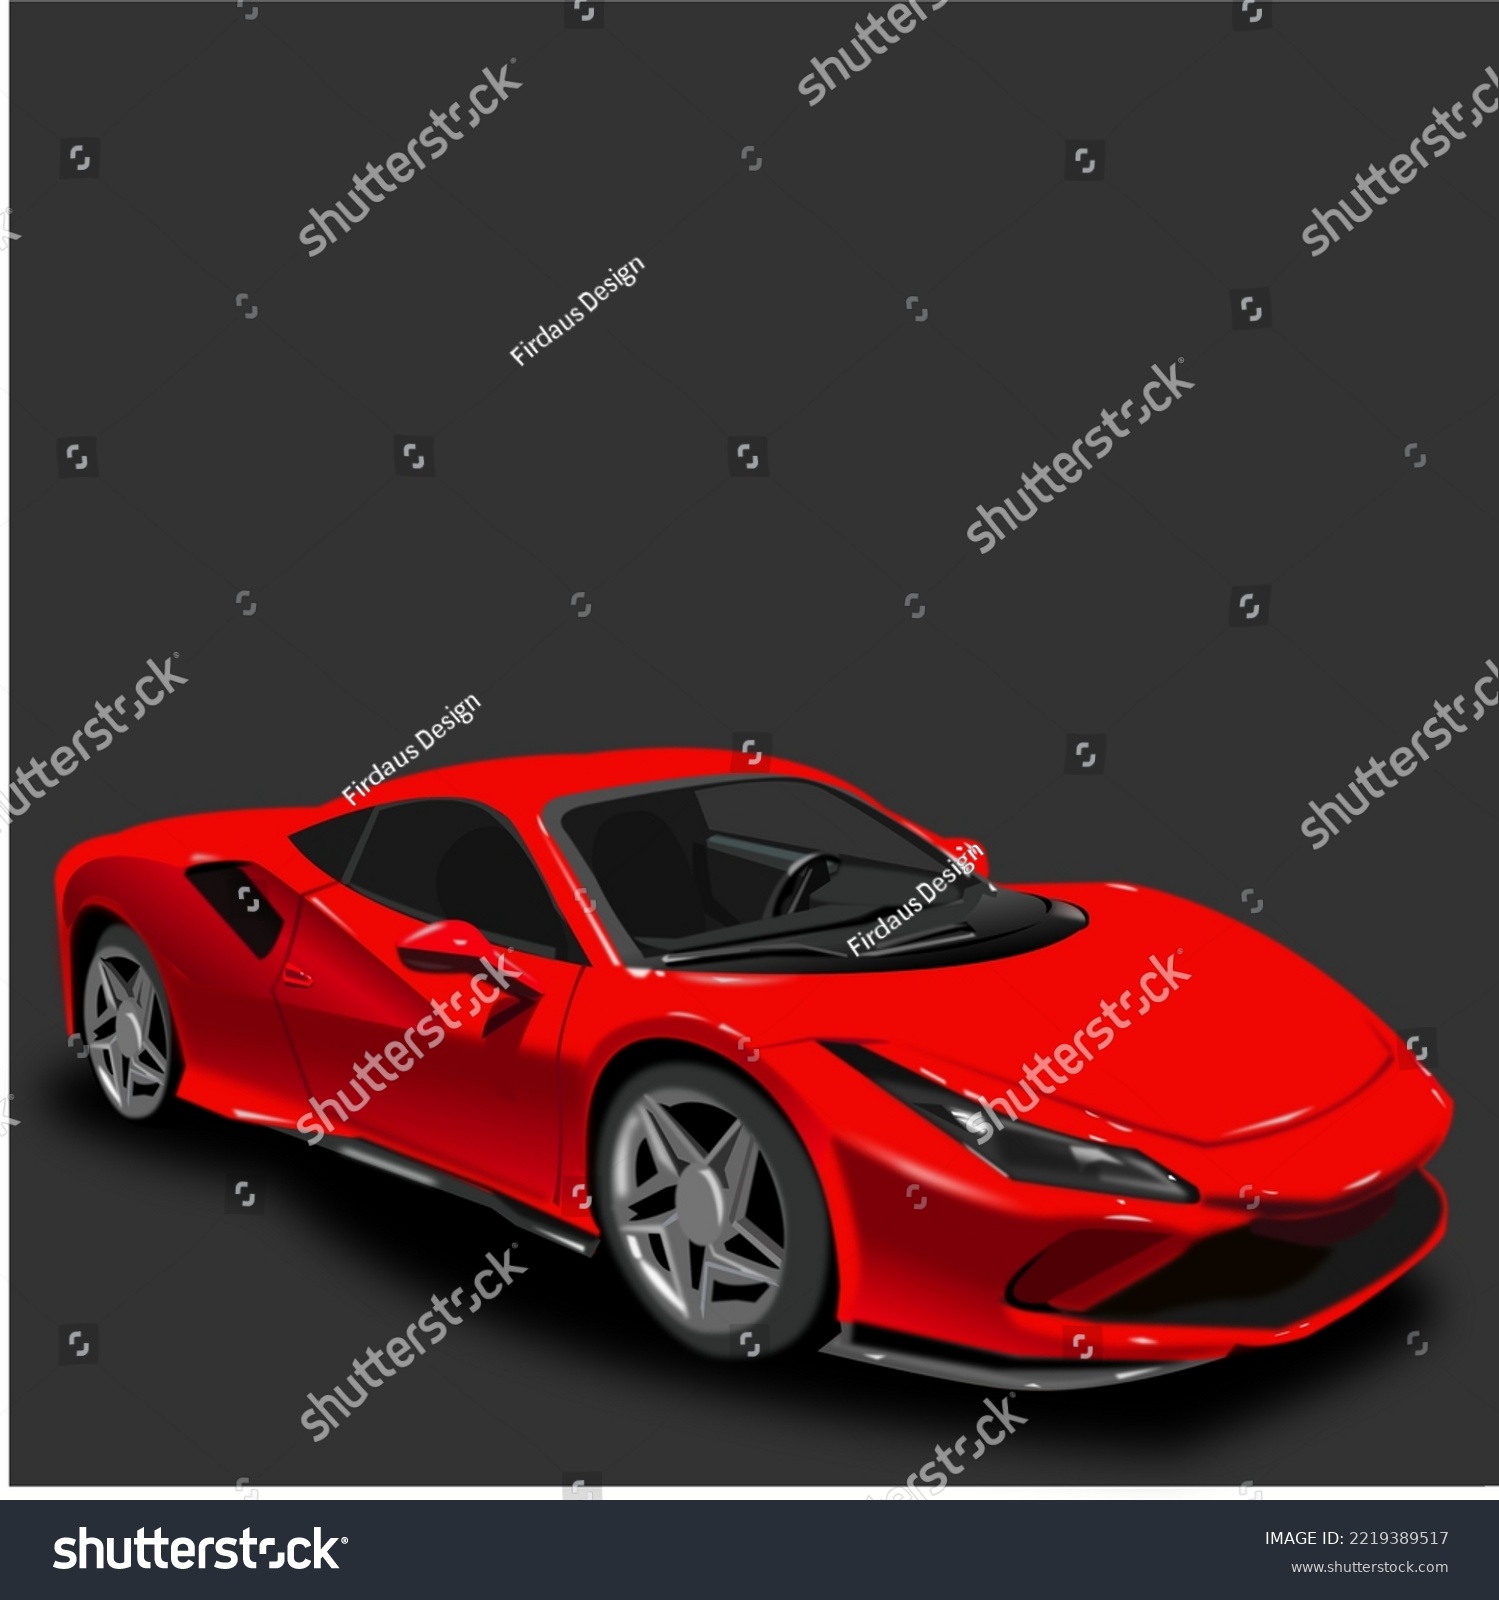 SVG of super car for high speed ferrary rich car expensive vector svg